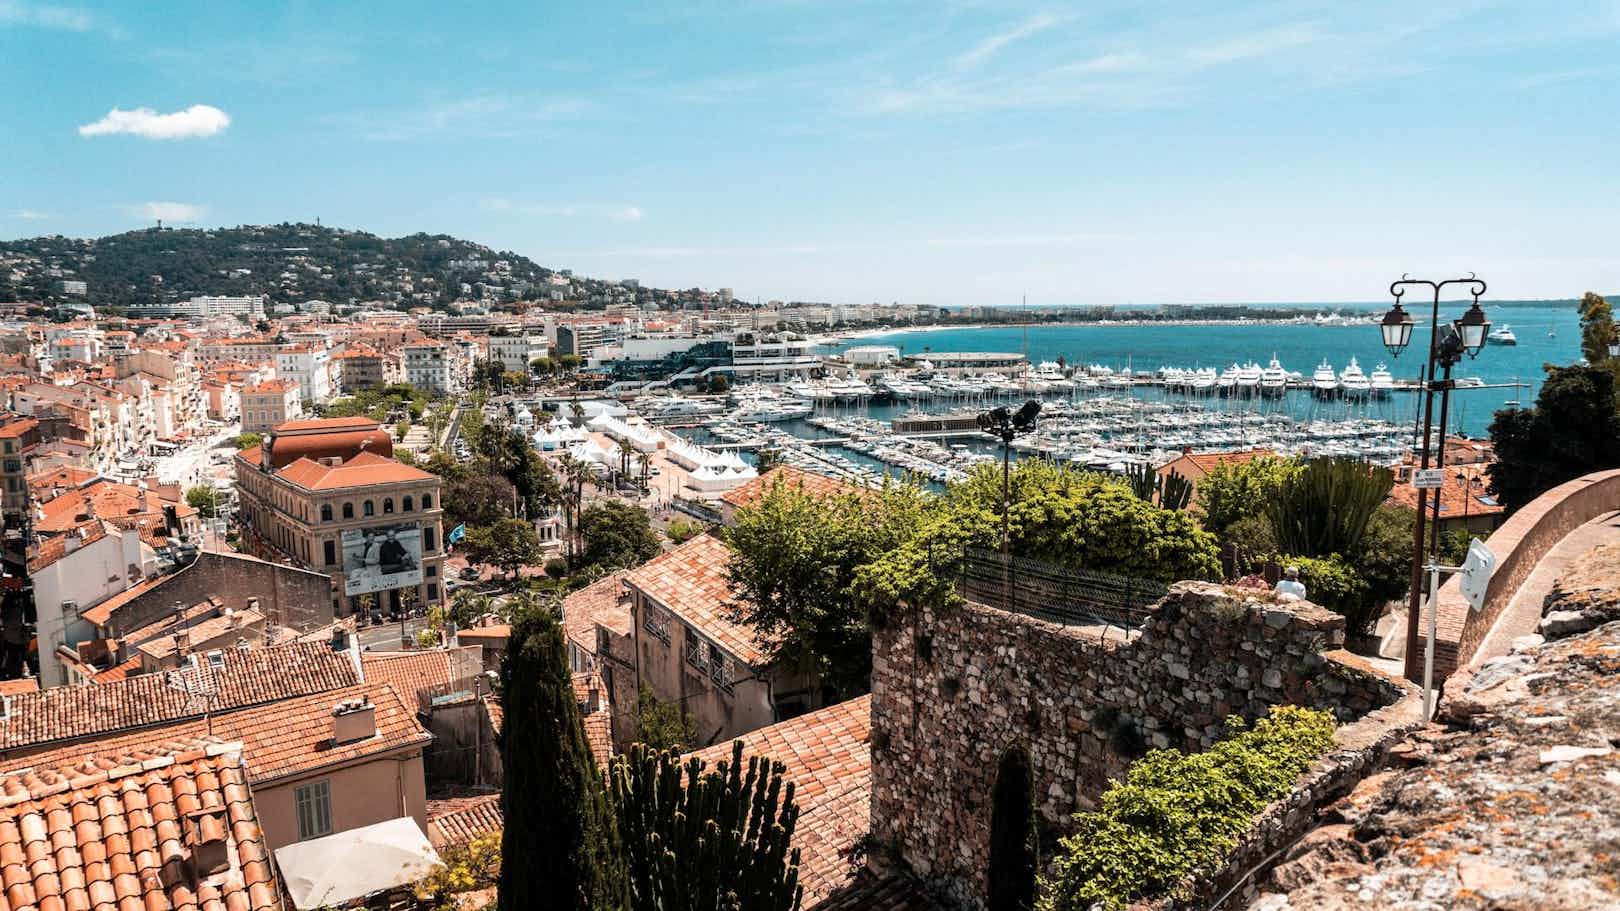 Top 16 South of France holiday destinations